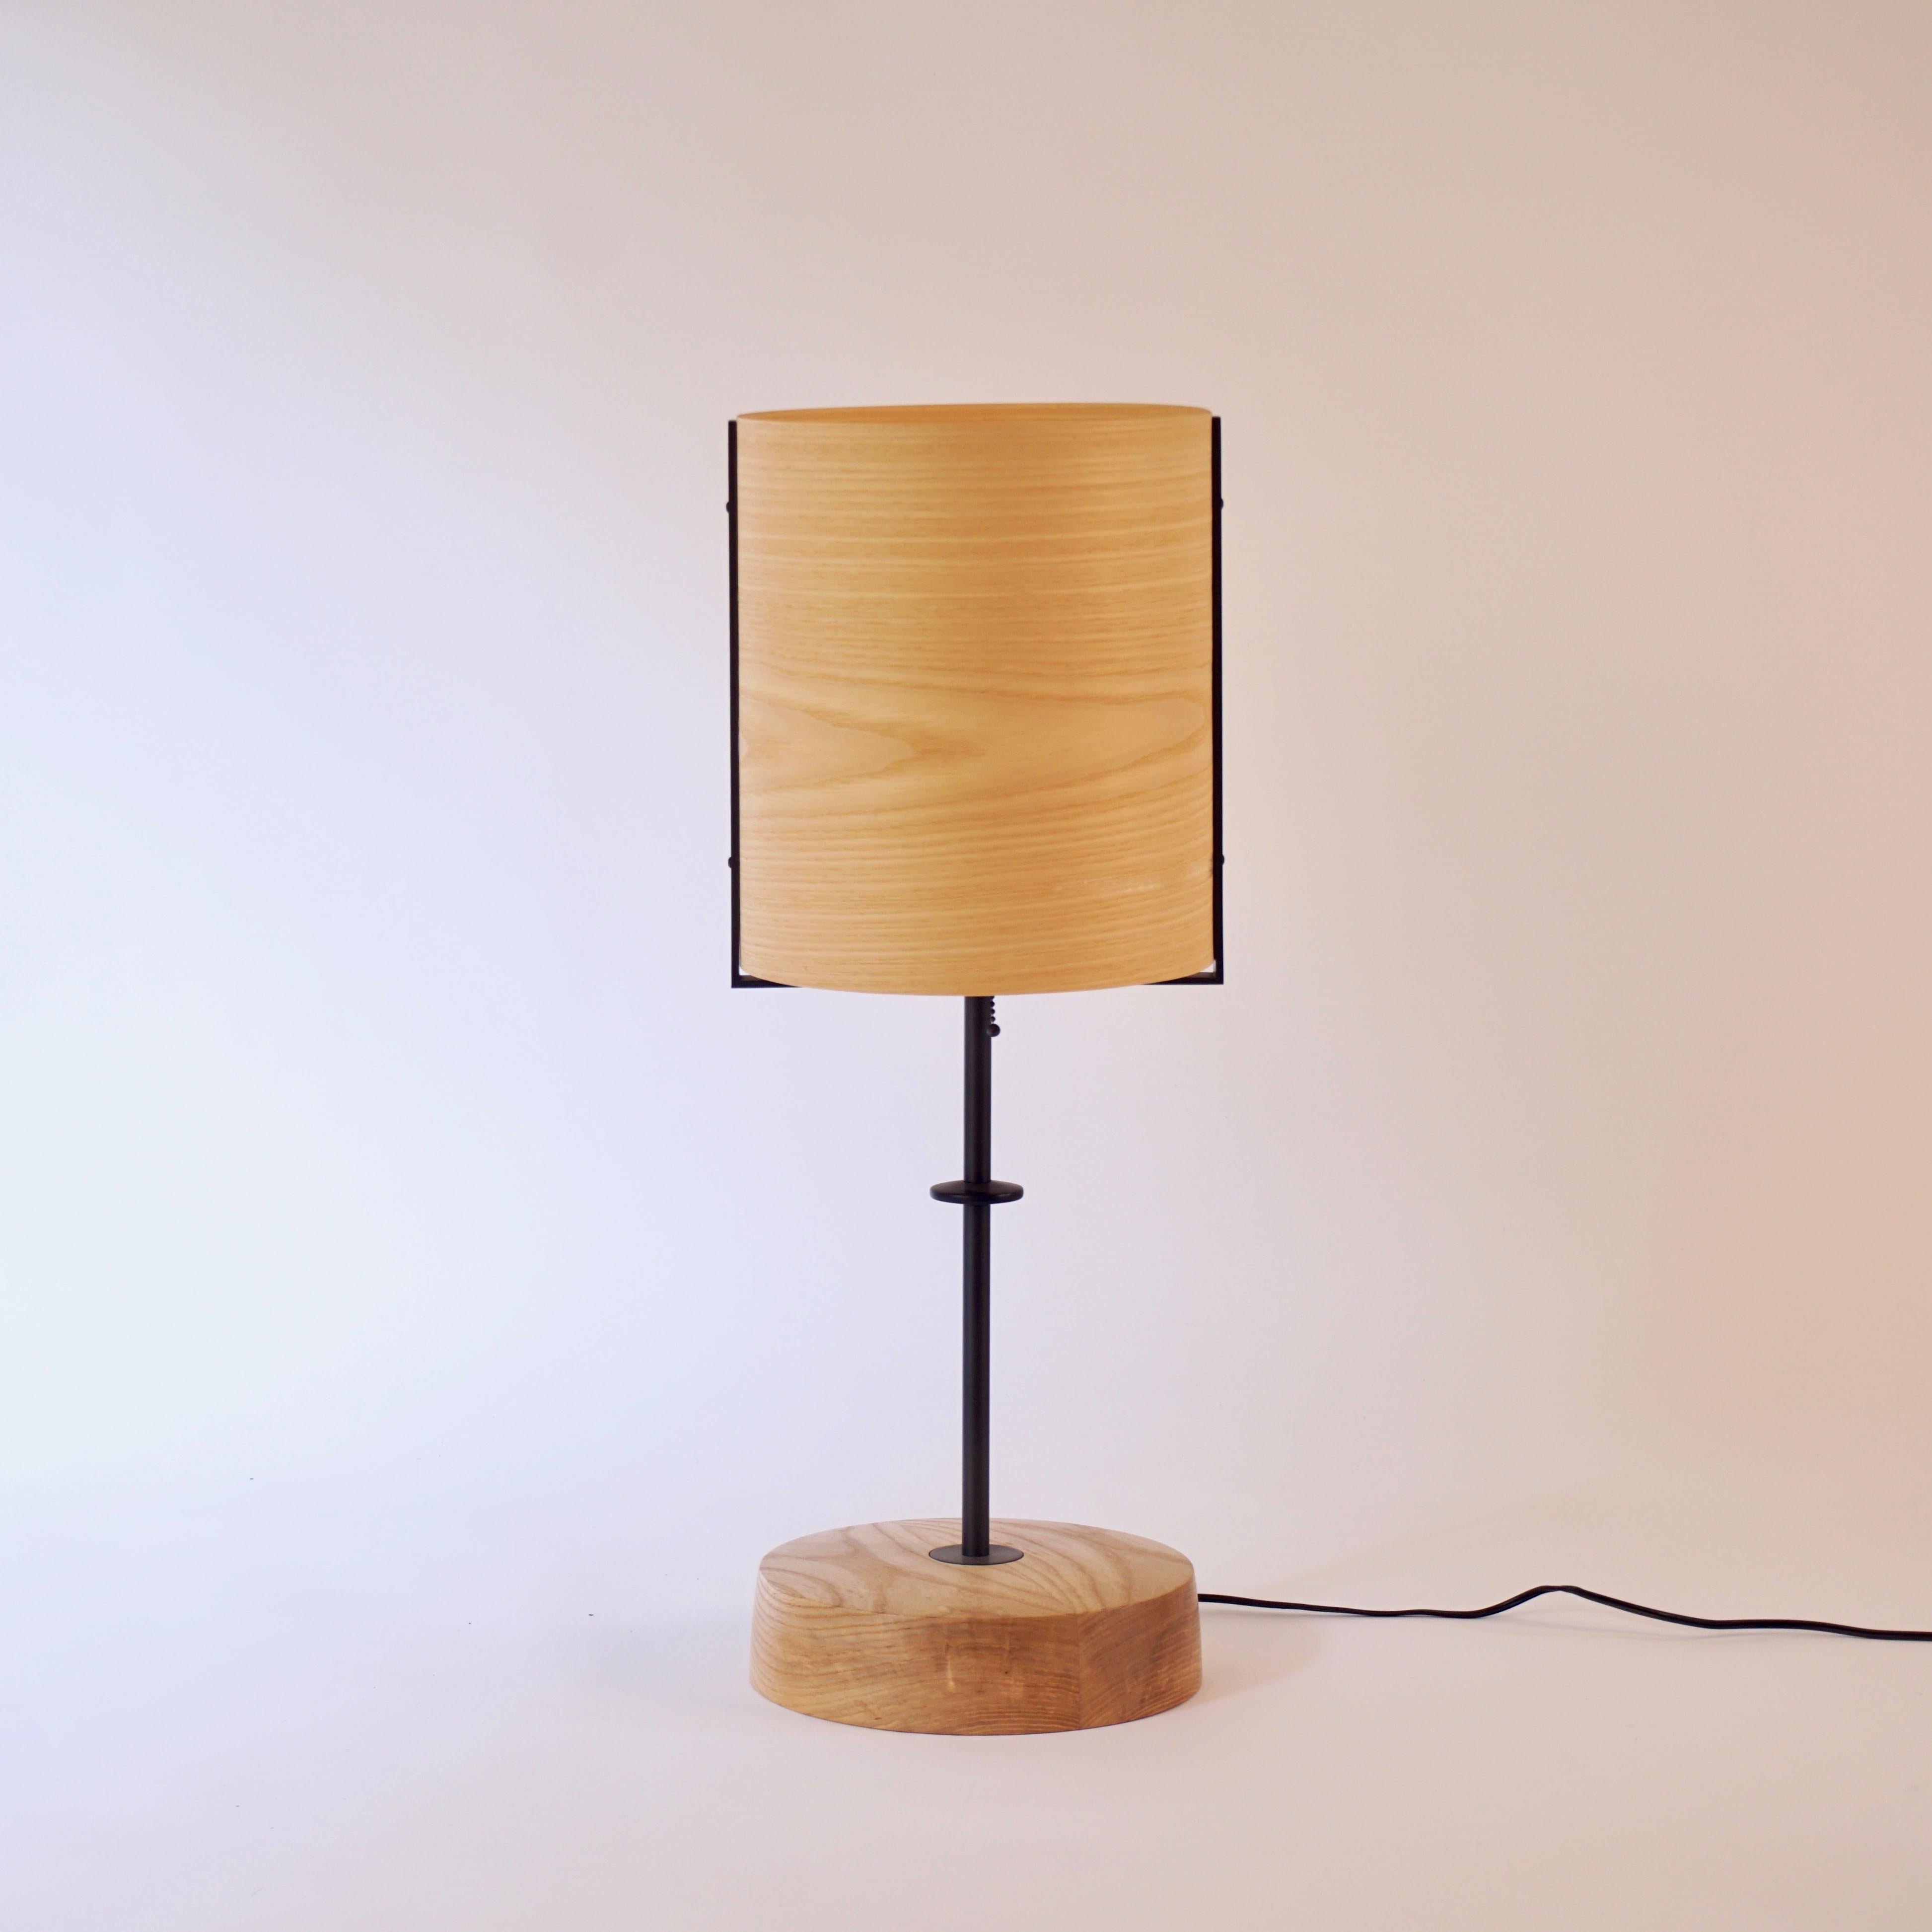 The ash veneer lamp #5 is part of the original Lehrecke Veneer Lighting Collection from 1998. The idea began with the beautiful way light passed through thin wood veneers, mostly local woods. The ash has a lightly yellow glow when lit and the glow